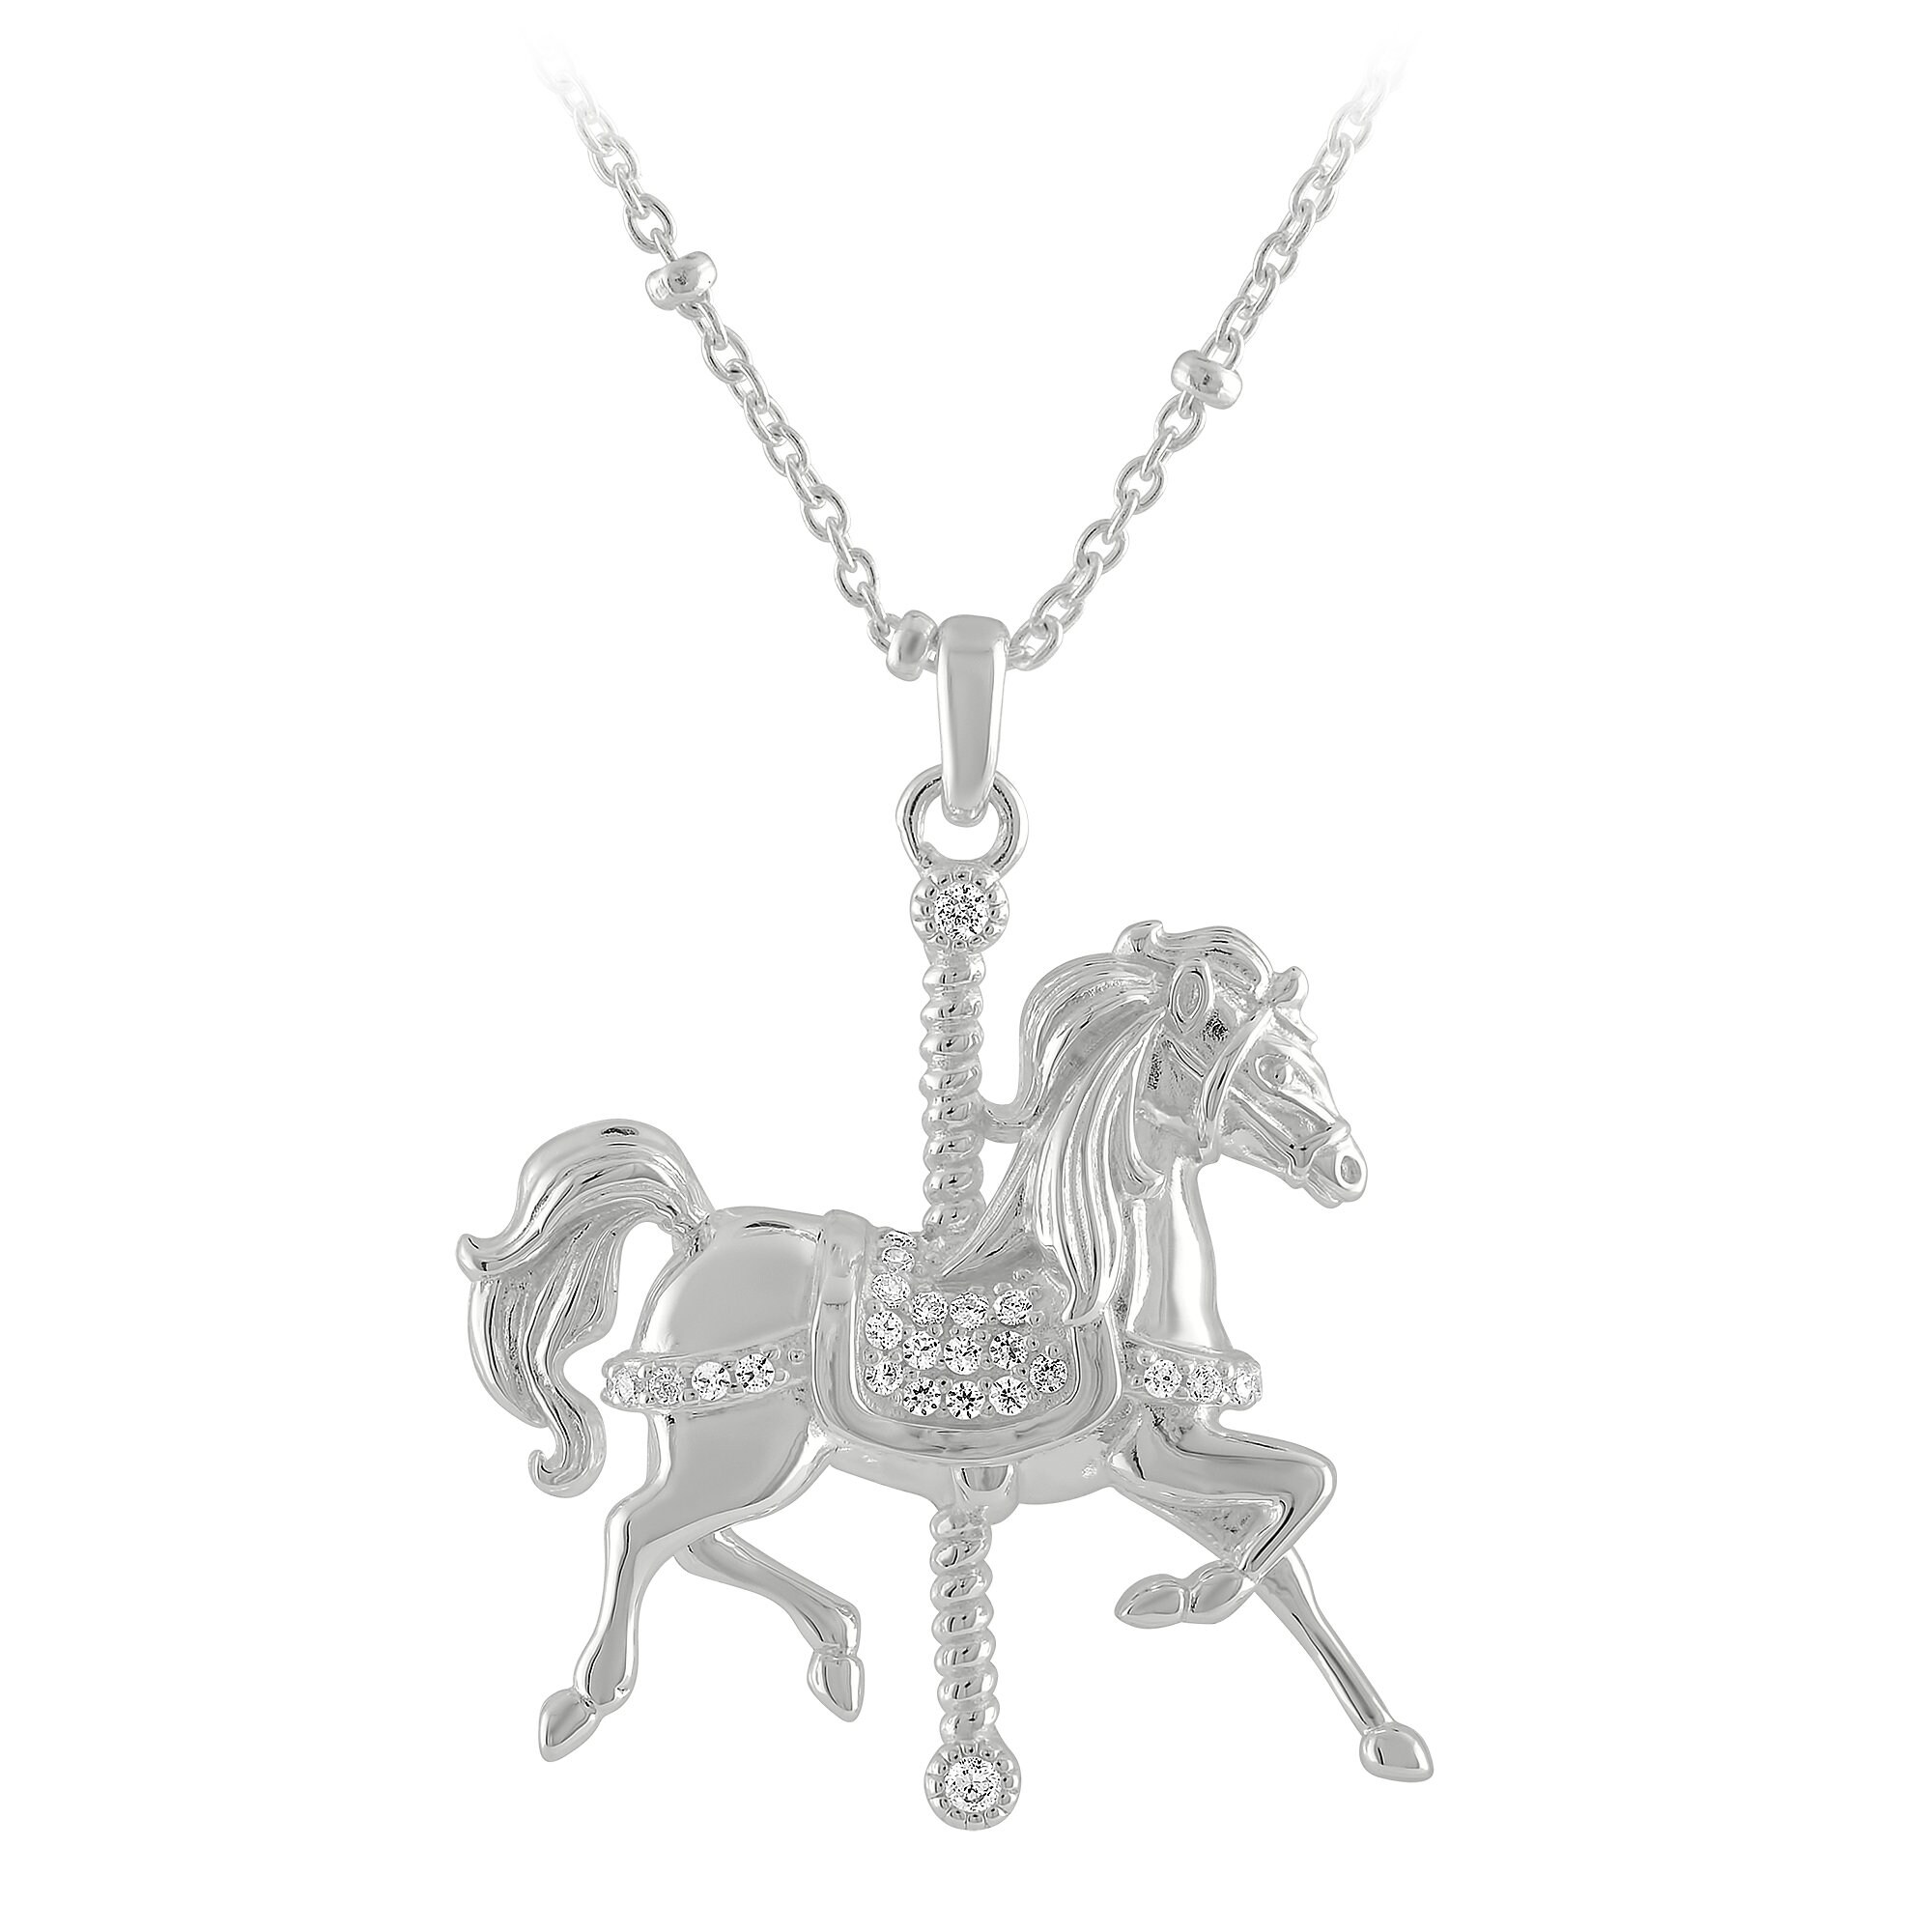 King Arthur Carrousel Horse Necklace by Rebecca Hook